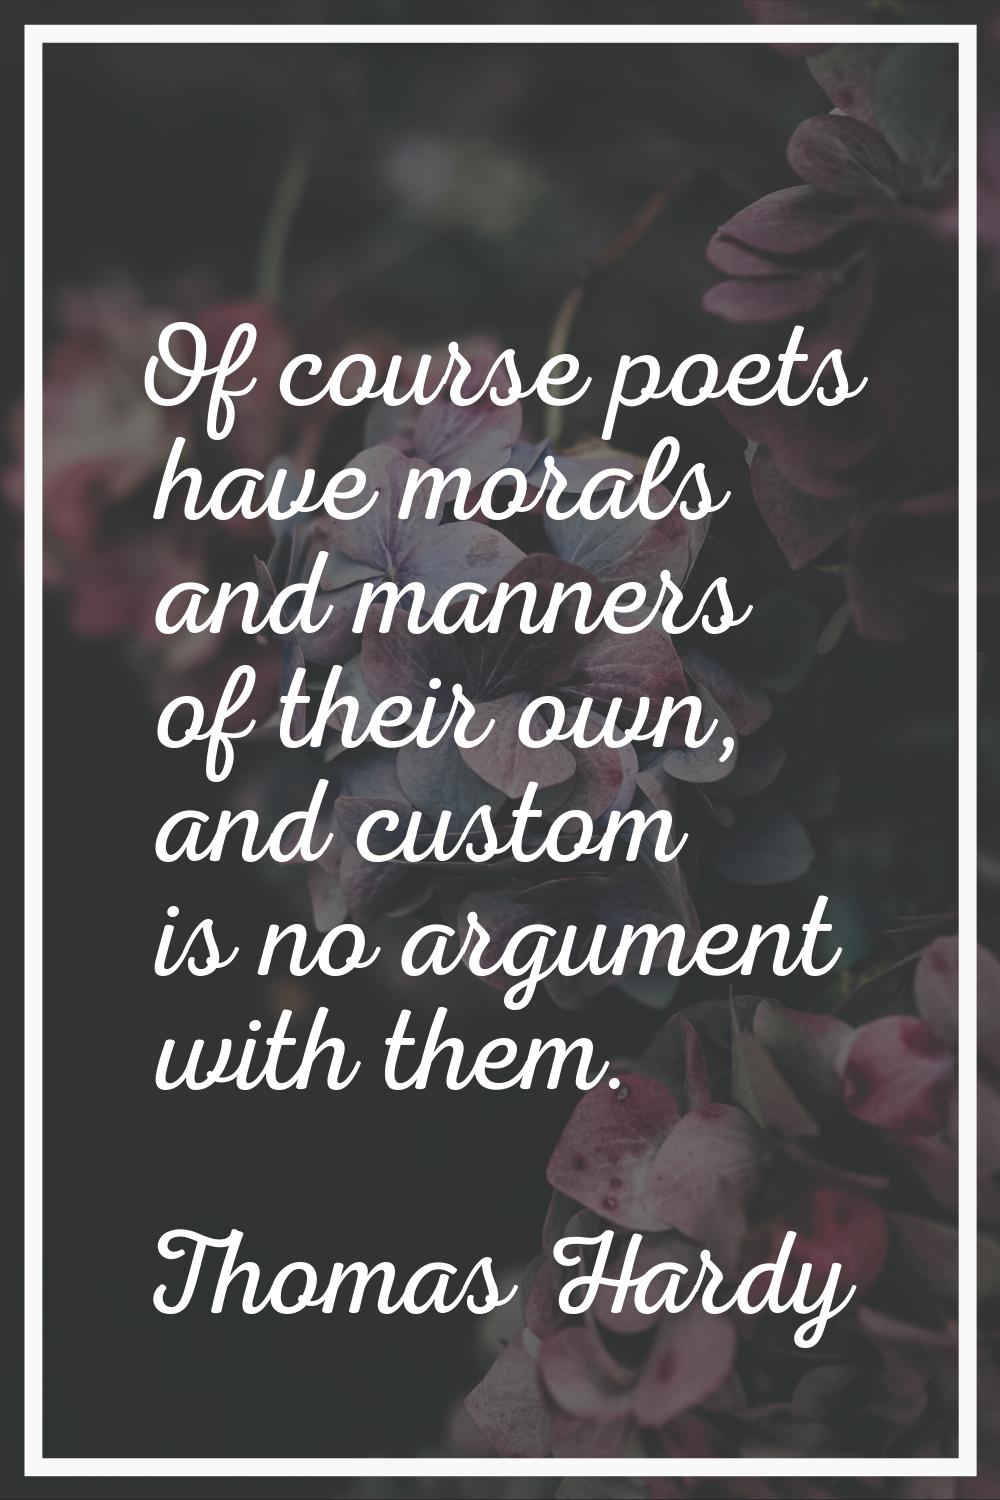 Of course poets have morals and manners of their own, and custom is no argument with them.